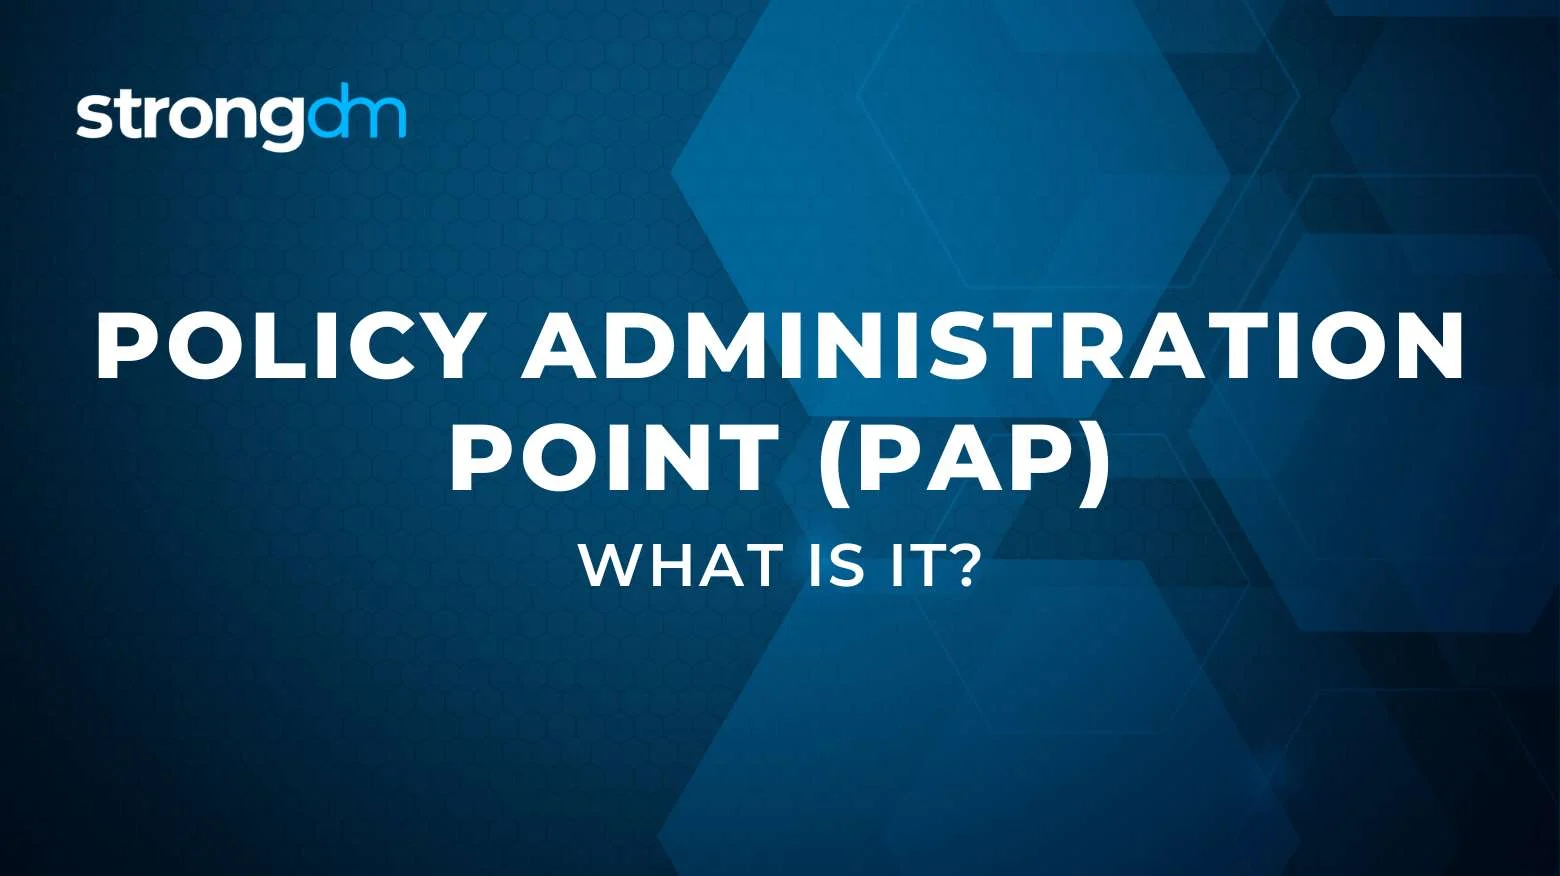 What Is a Policy Administration Point (PAP)?